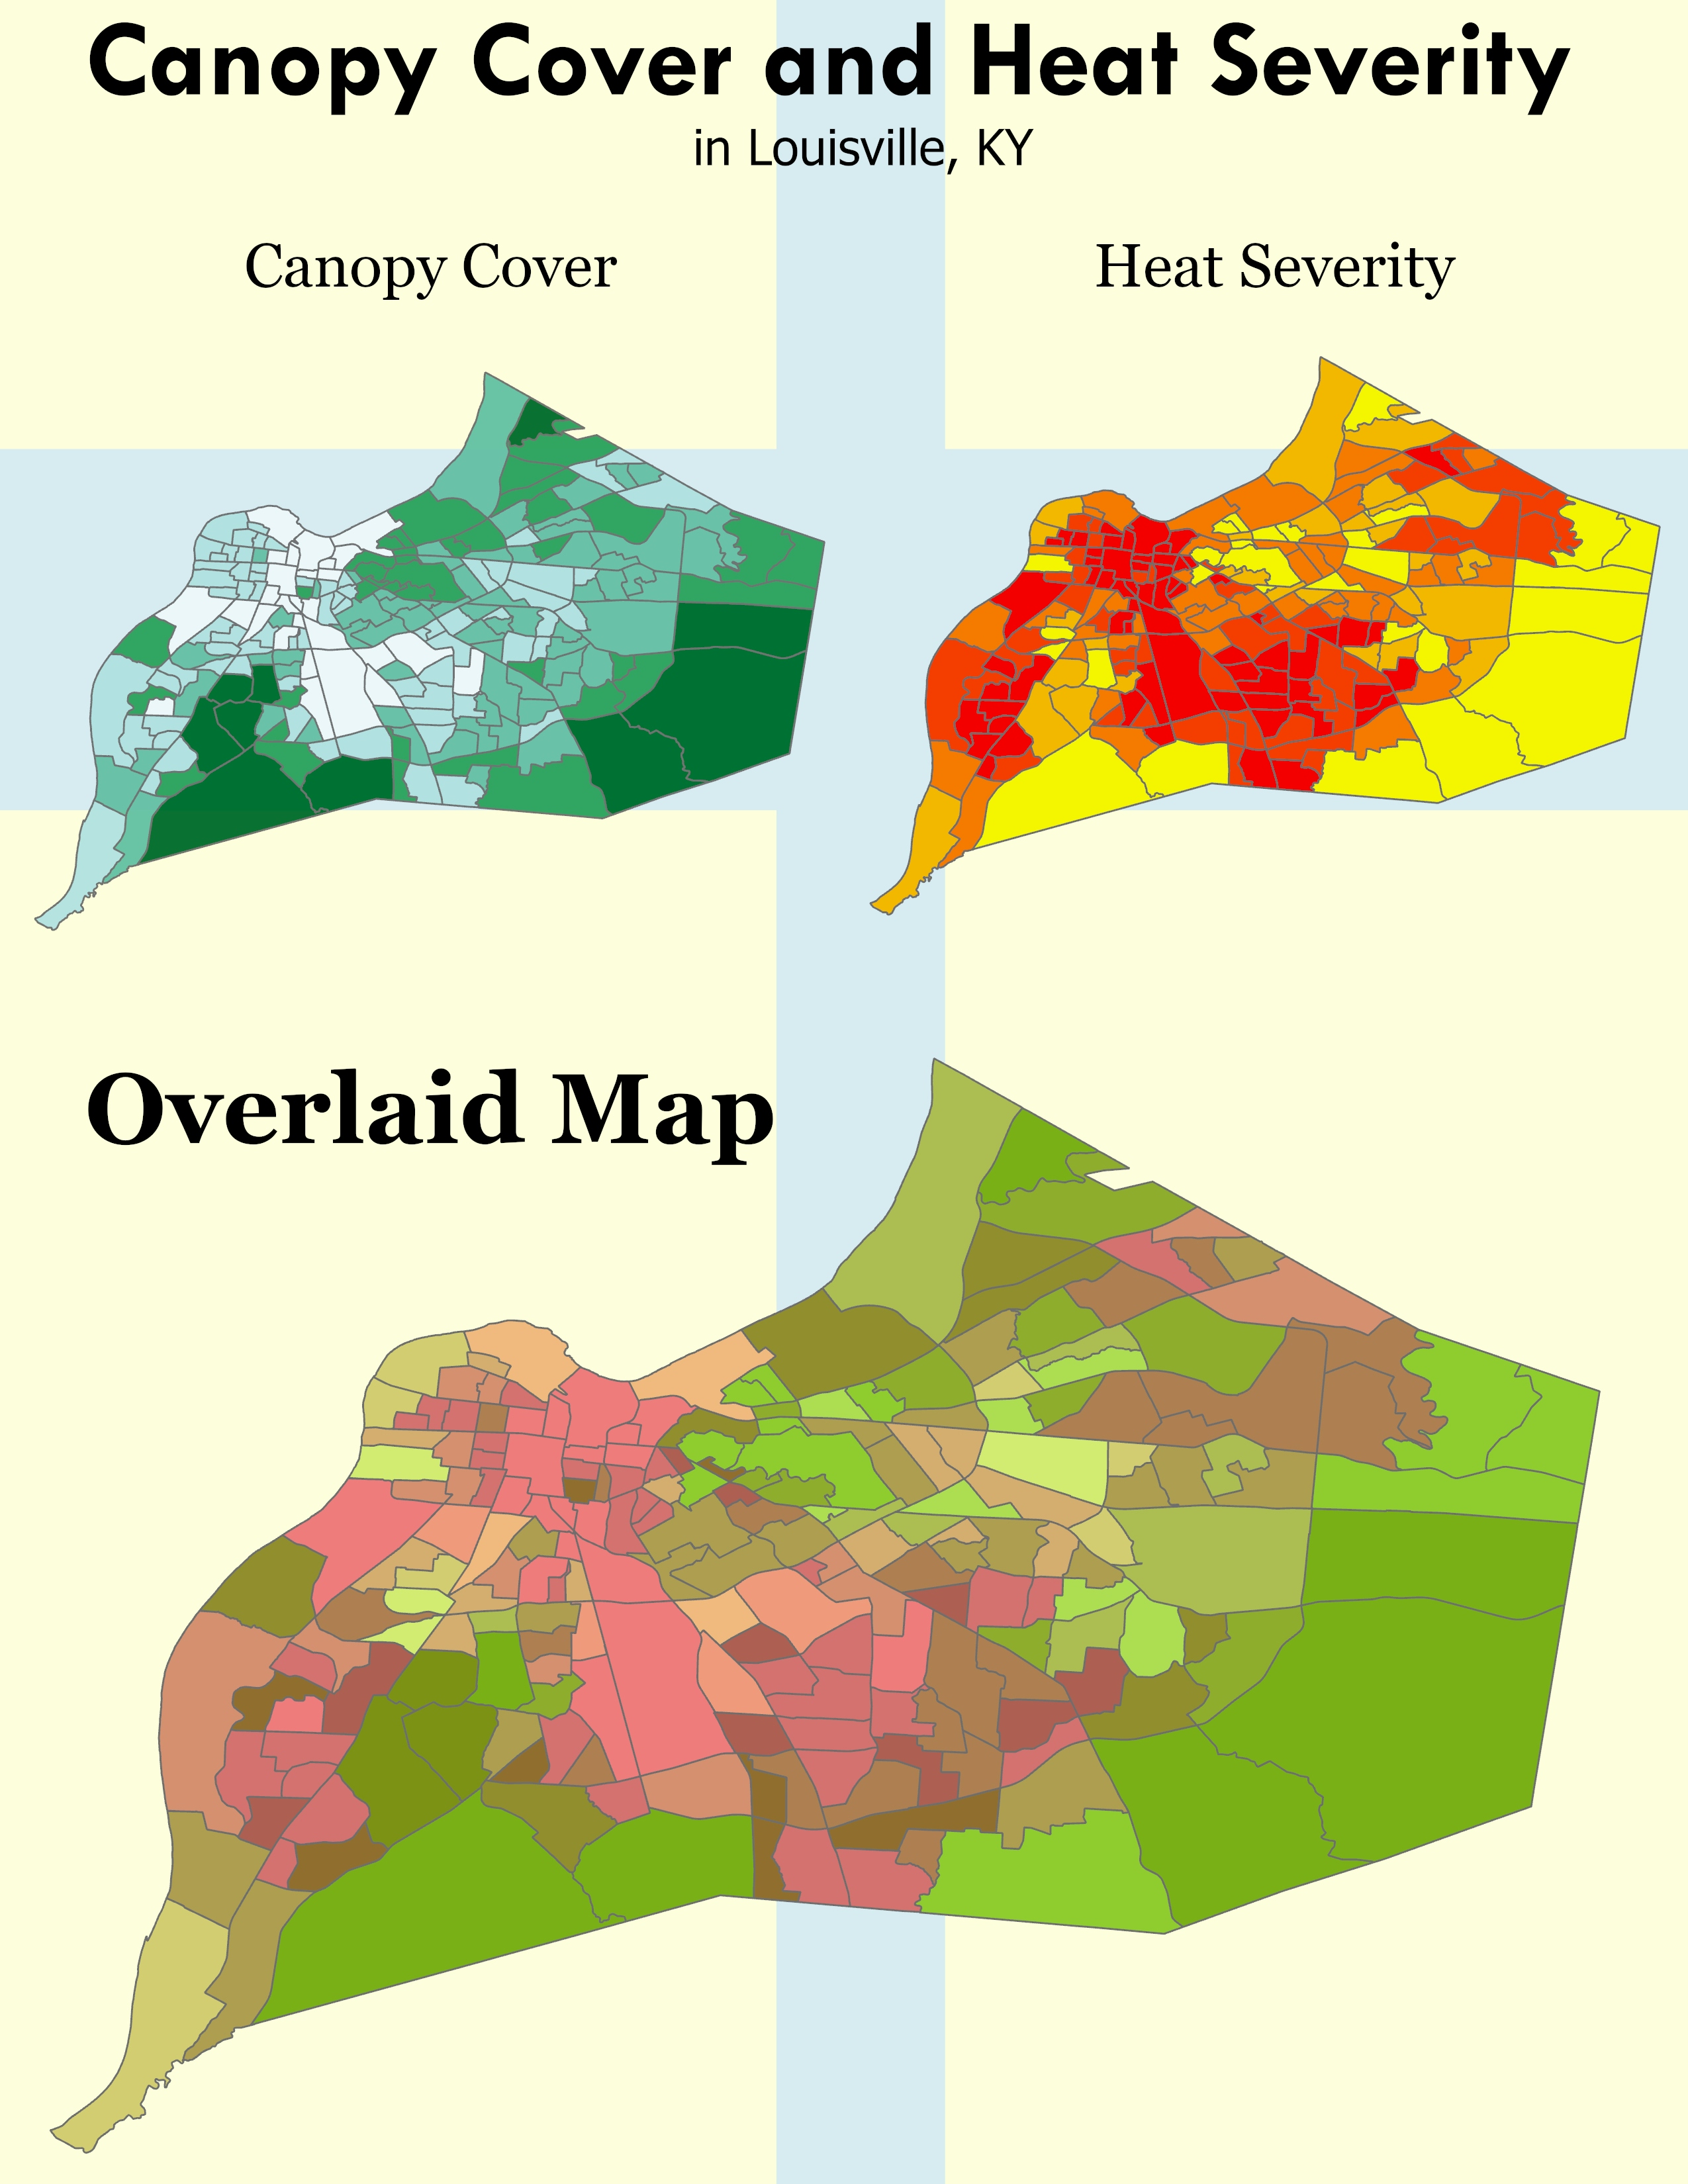 Canopy Cover and Heat Severity